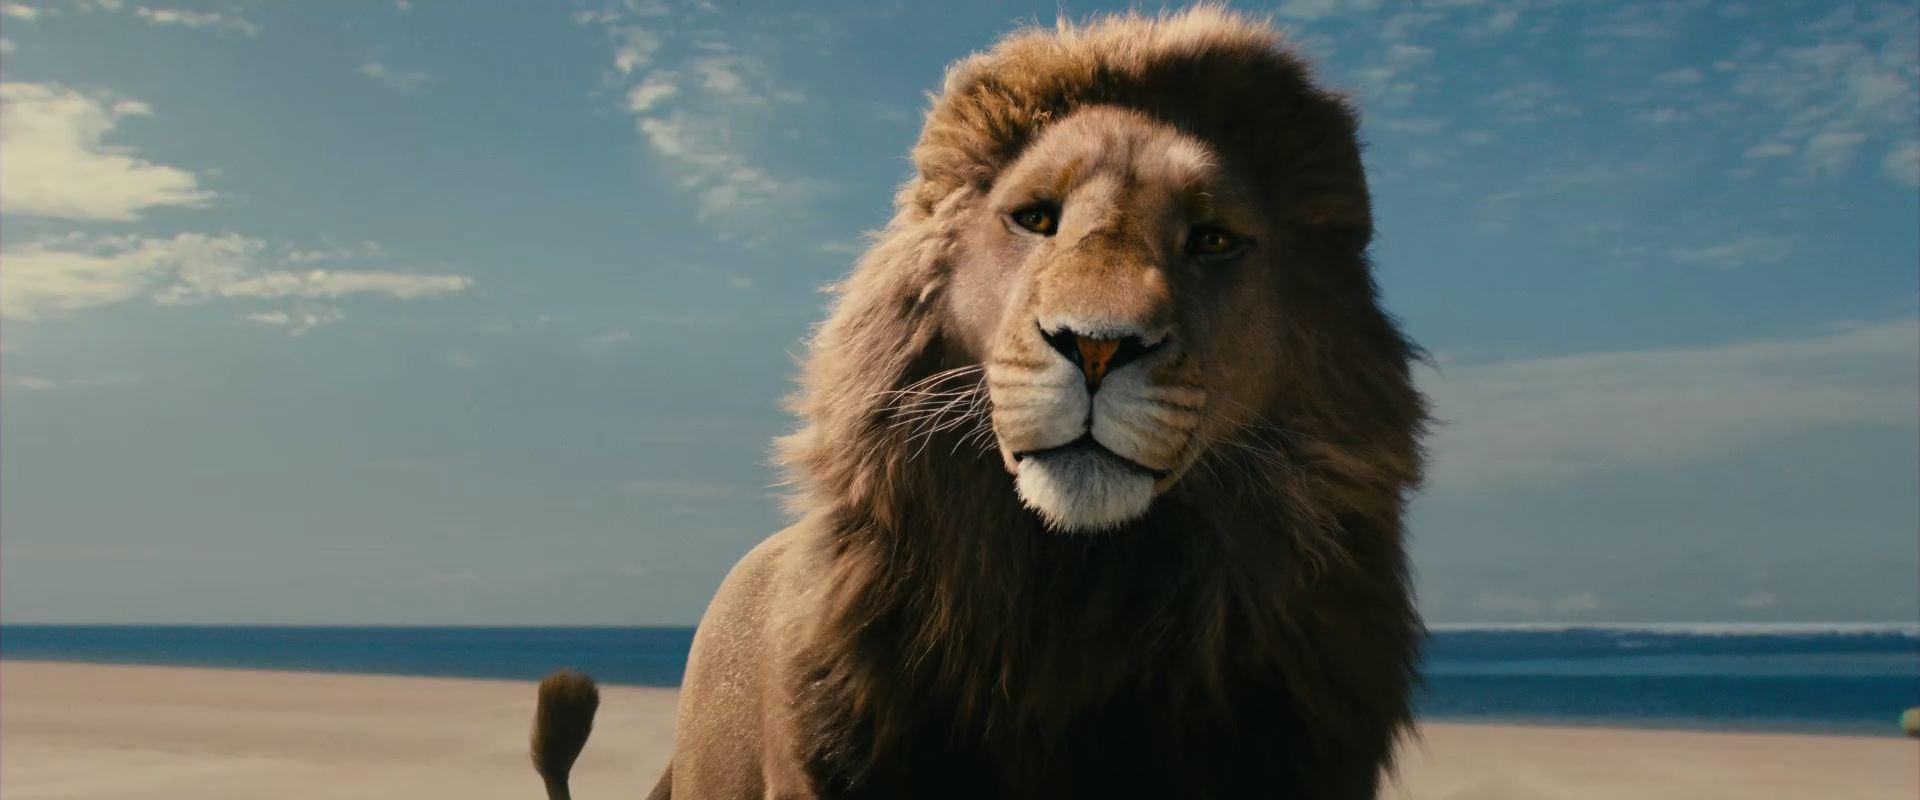 Aslan the Lion from the Movie The Chronicles of Narnia Voyage